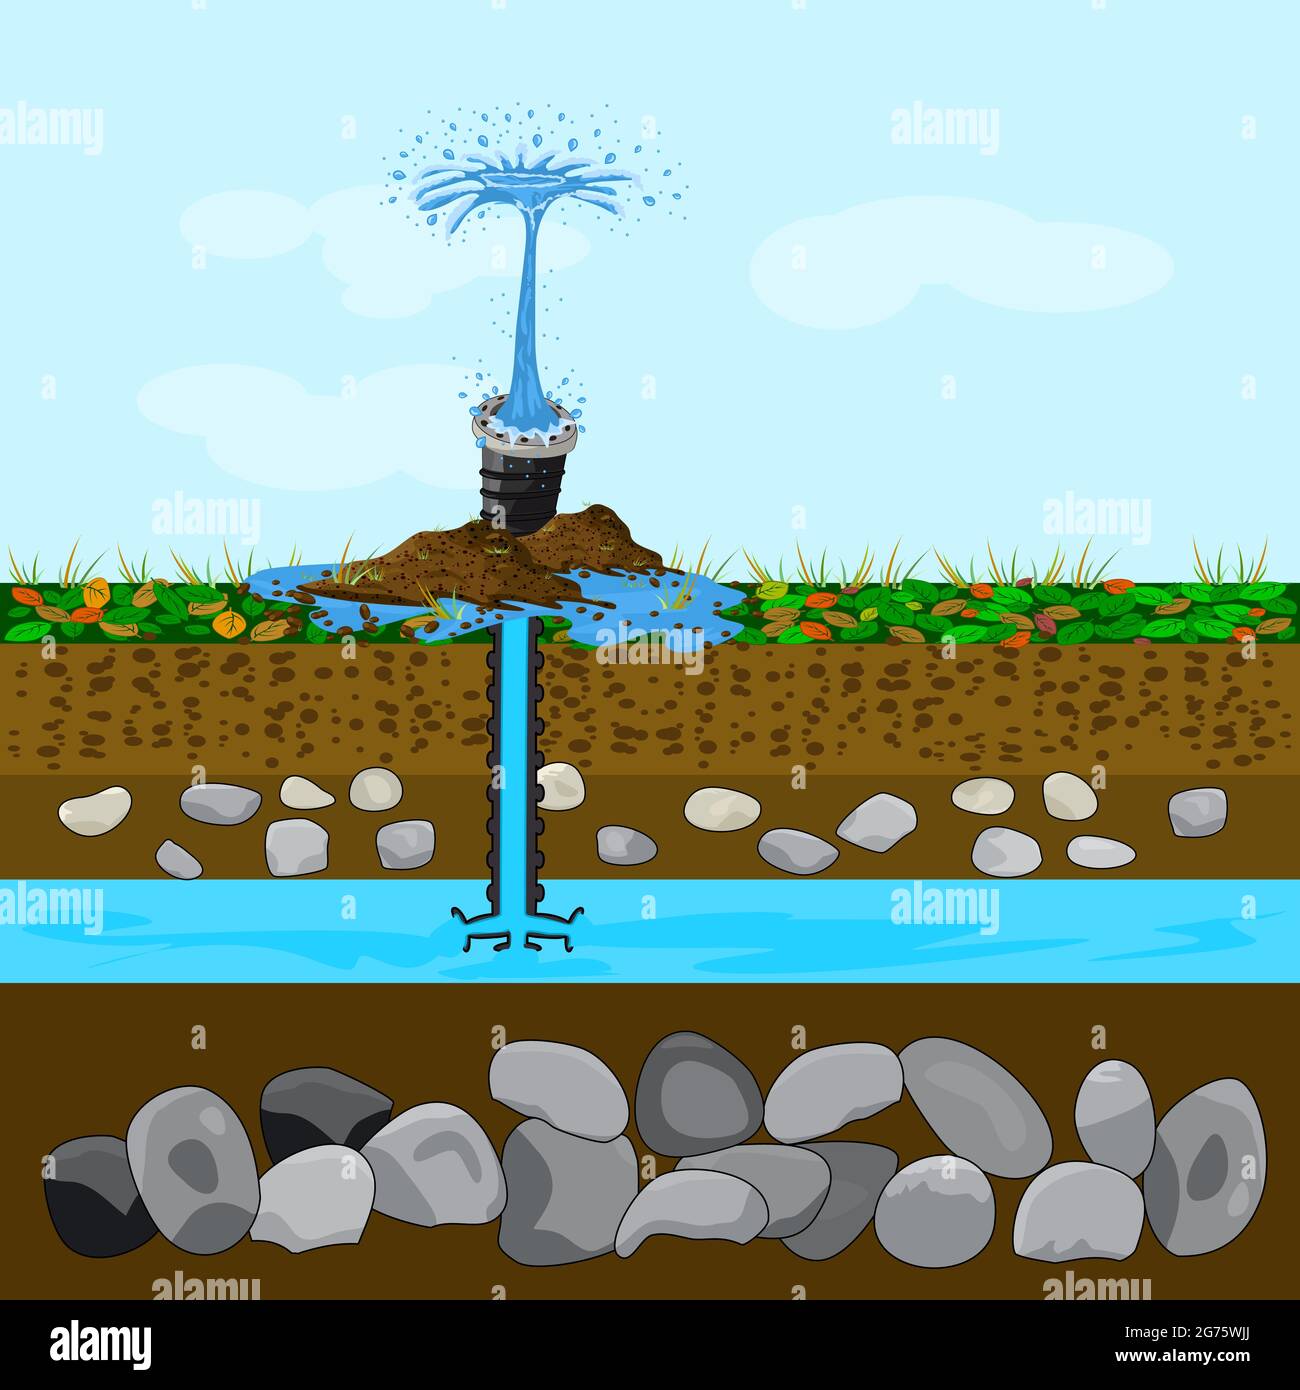 Groundwater or artesian water. Water extraction. Artesian water well in